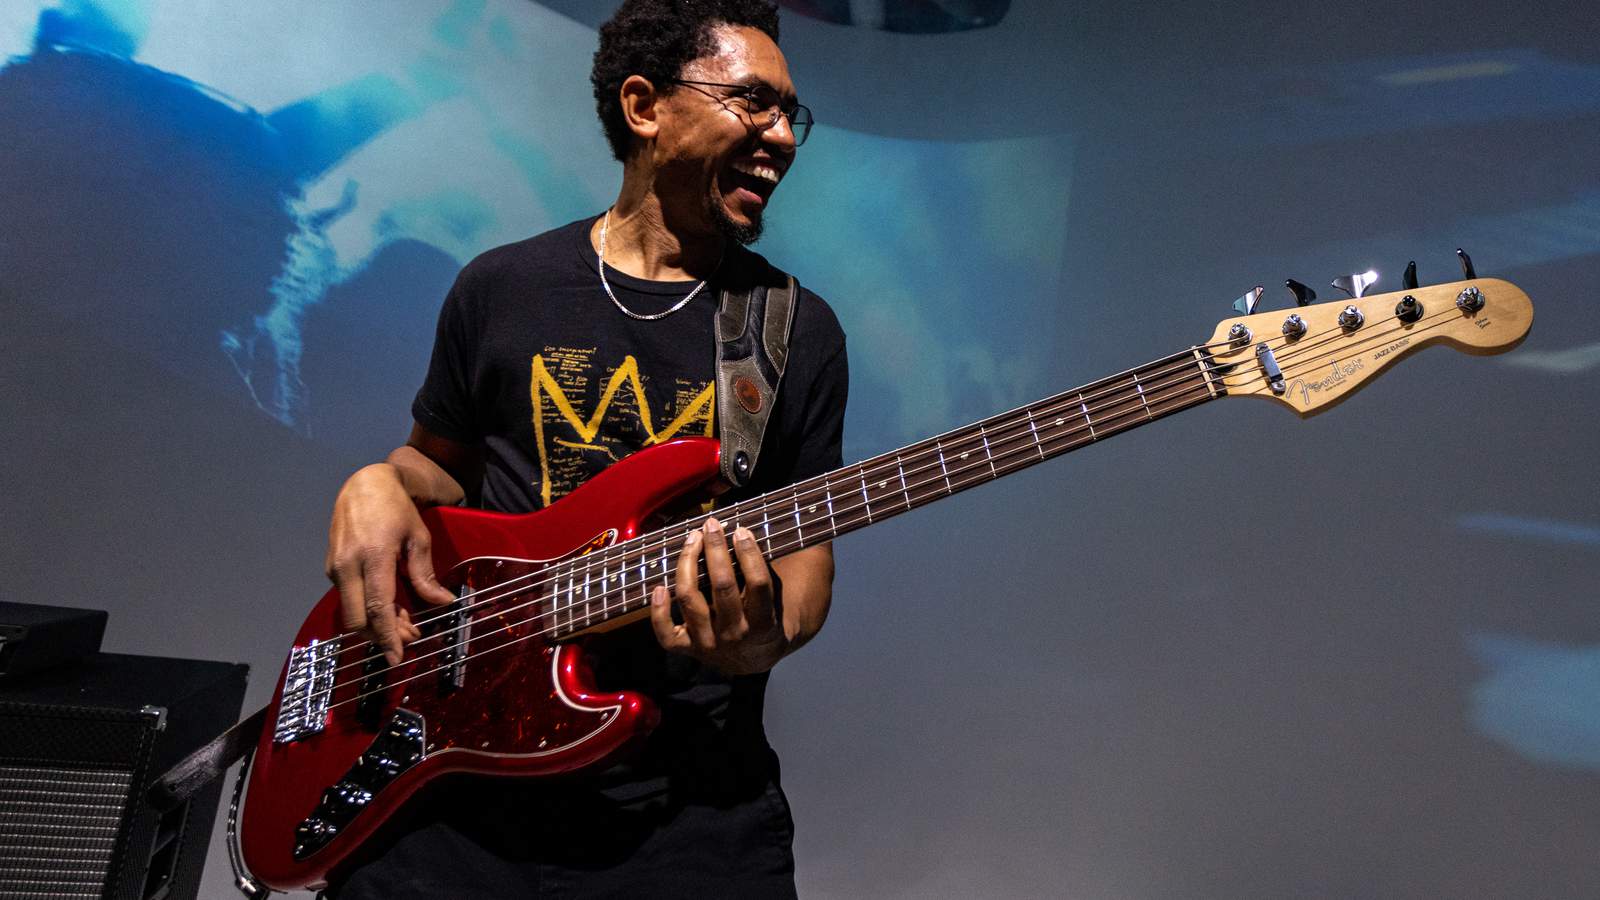 Bassist Alex "Busby" Smith performing with his bass